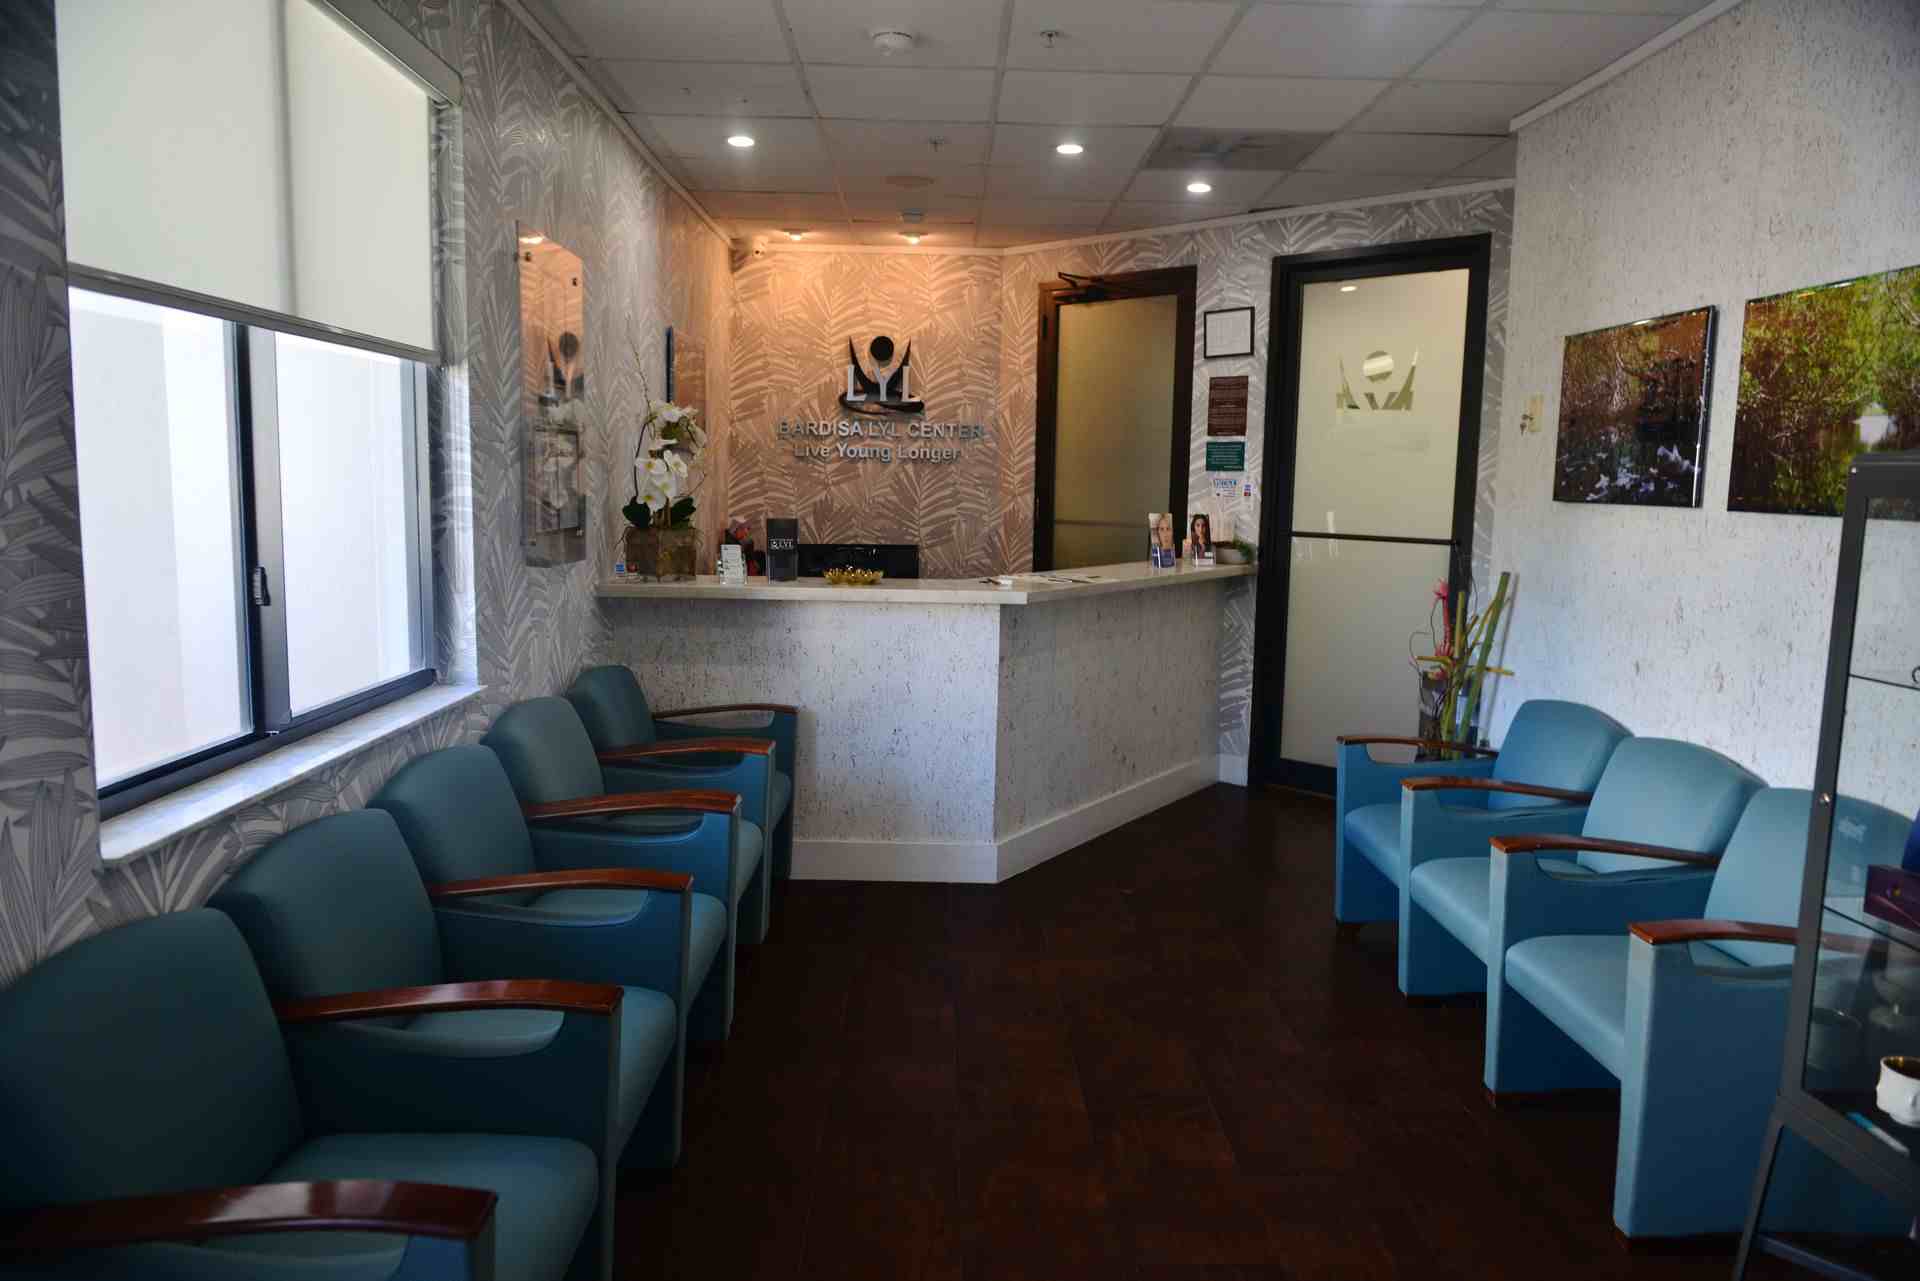 Waiting room with blue chairs, white counter and paintings on the white wall